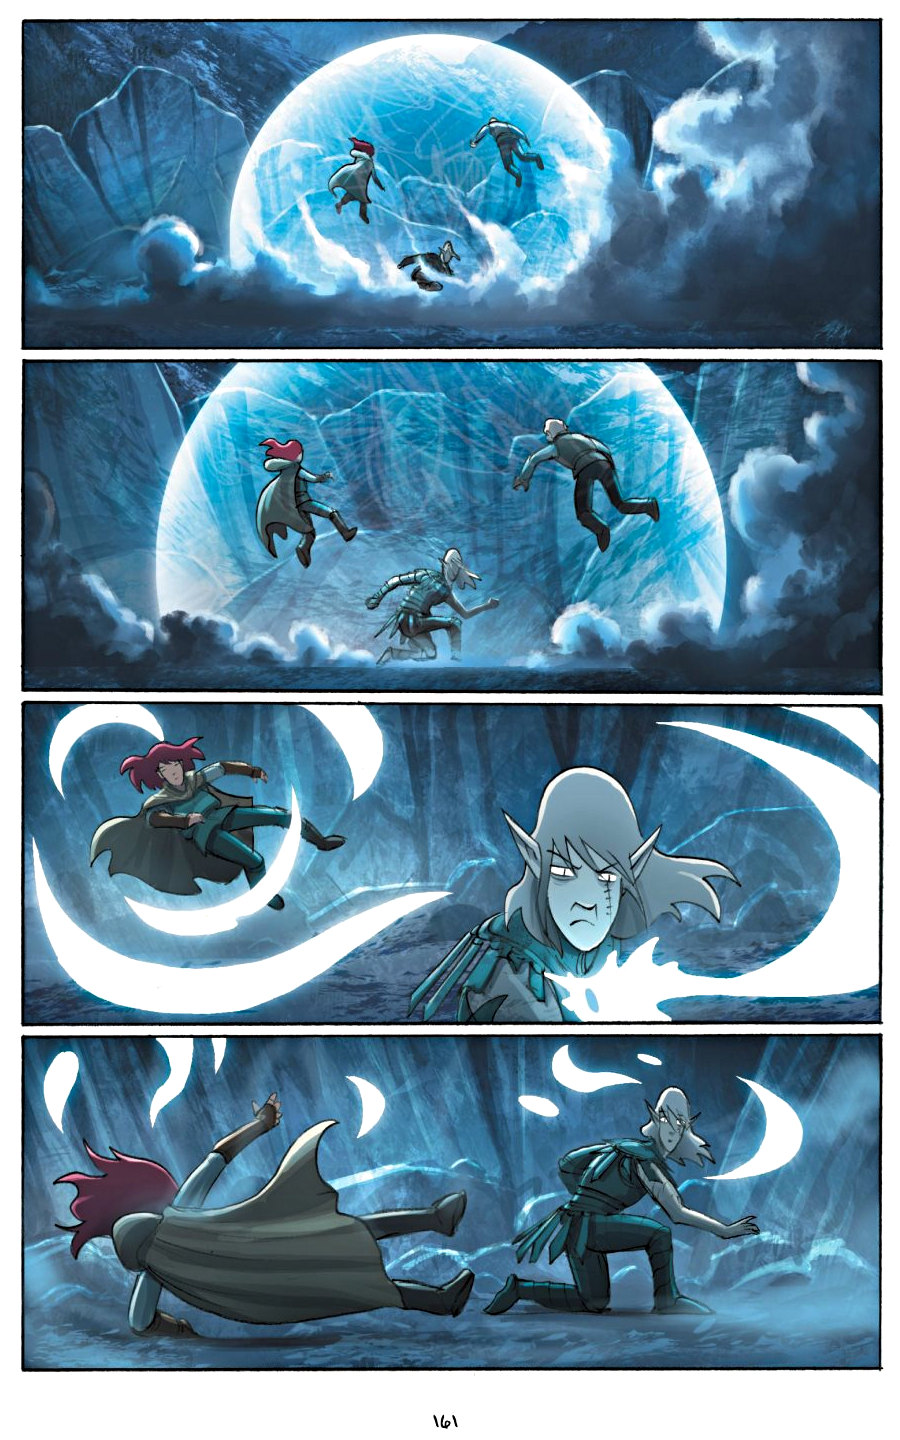 page 161 of amulet 5 prince of the elves graphic novel